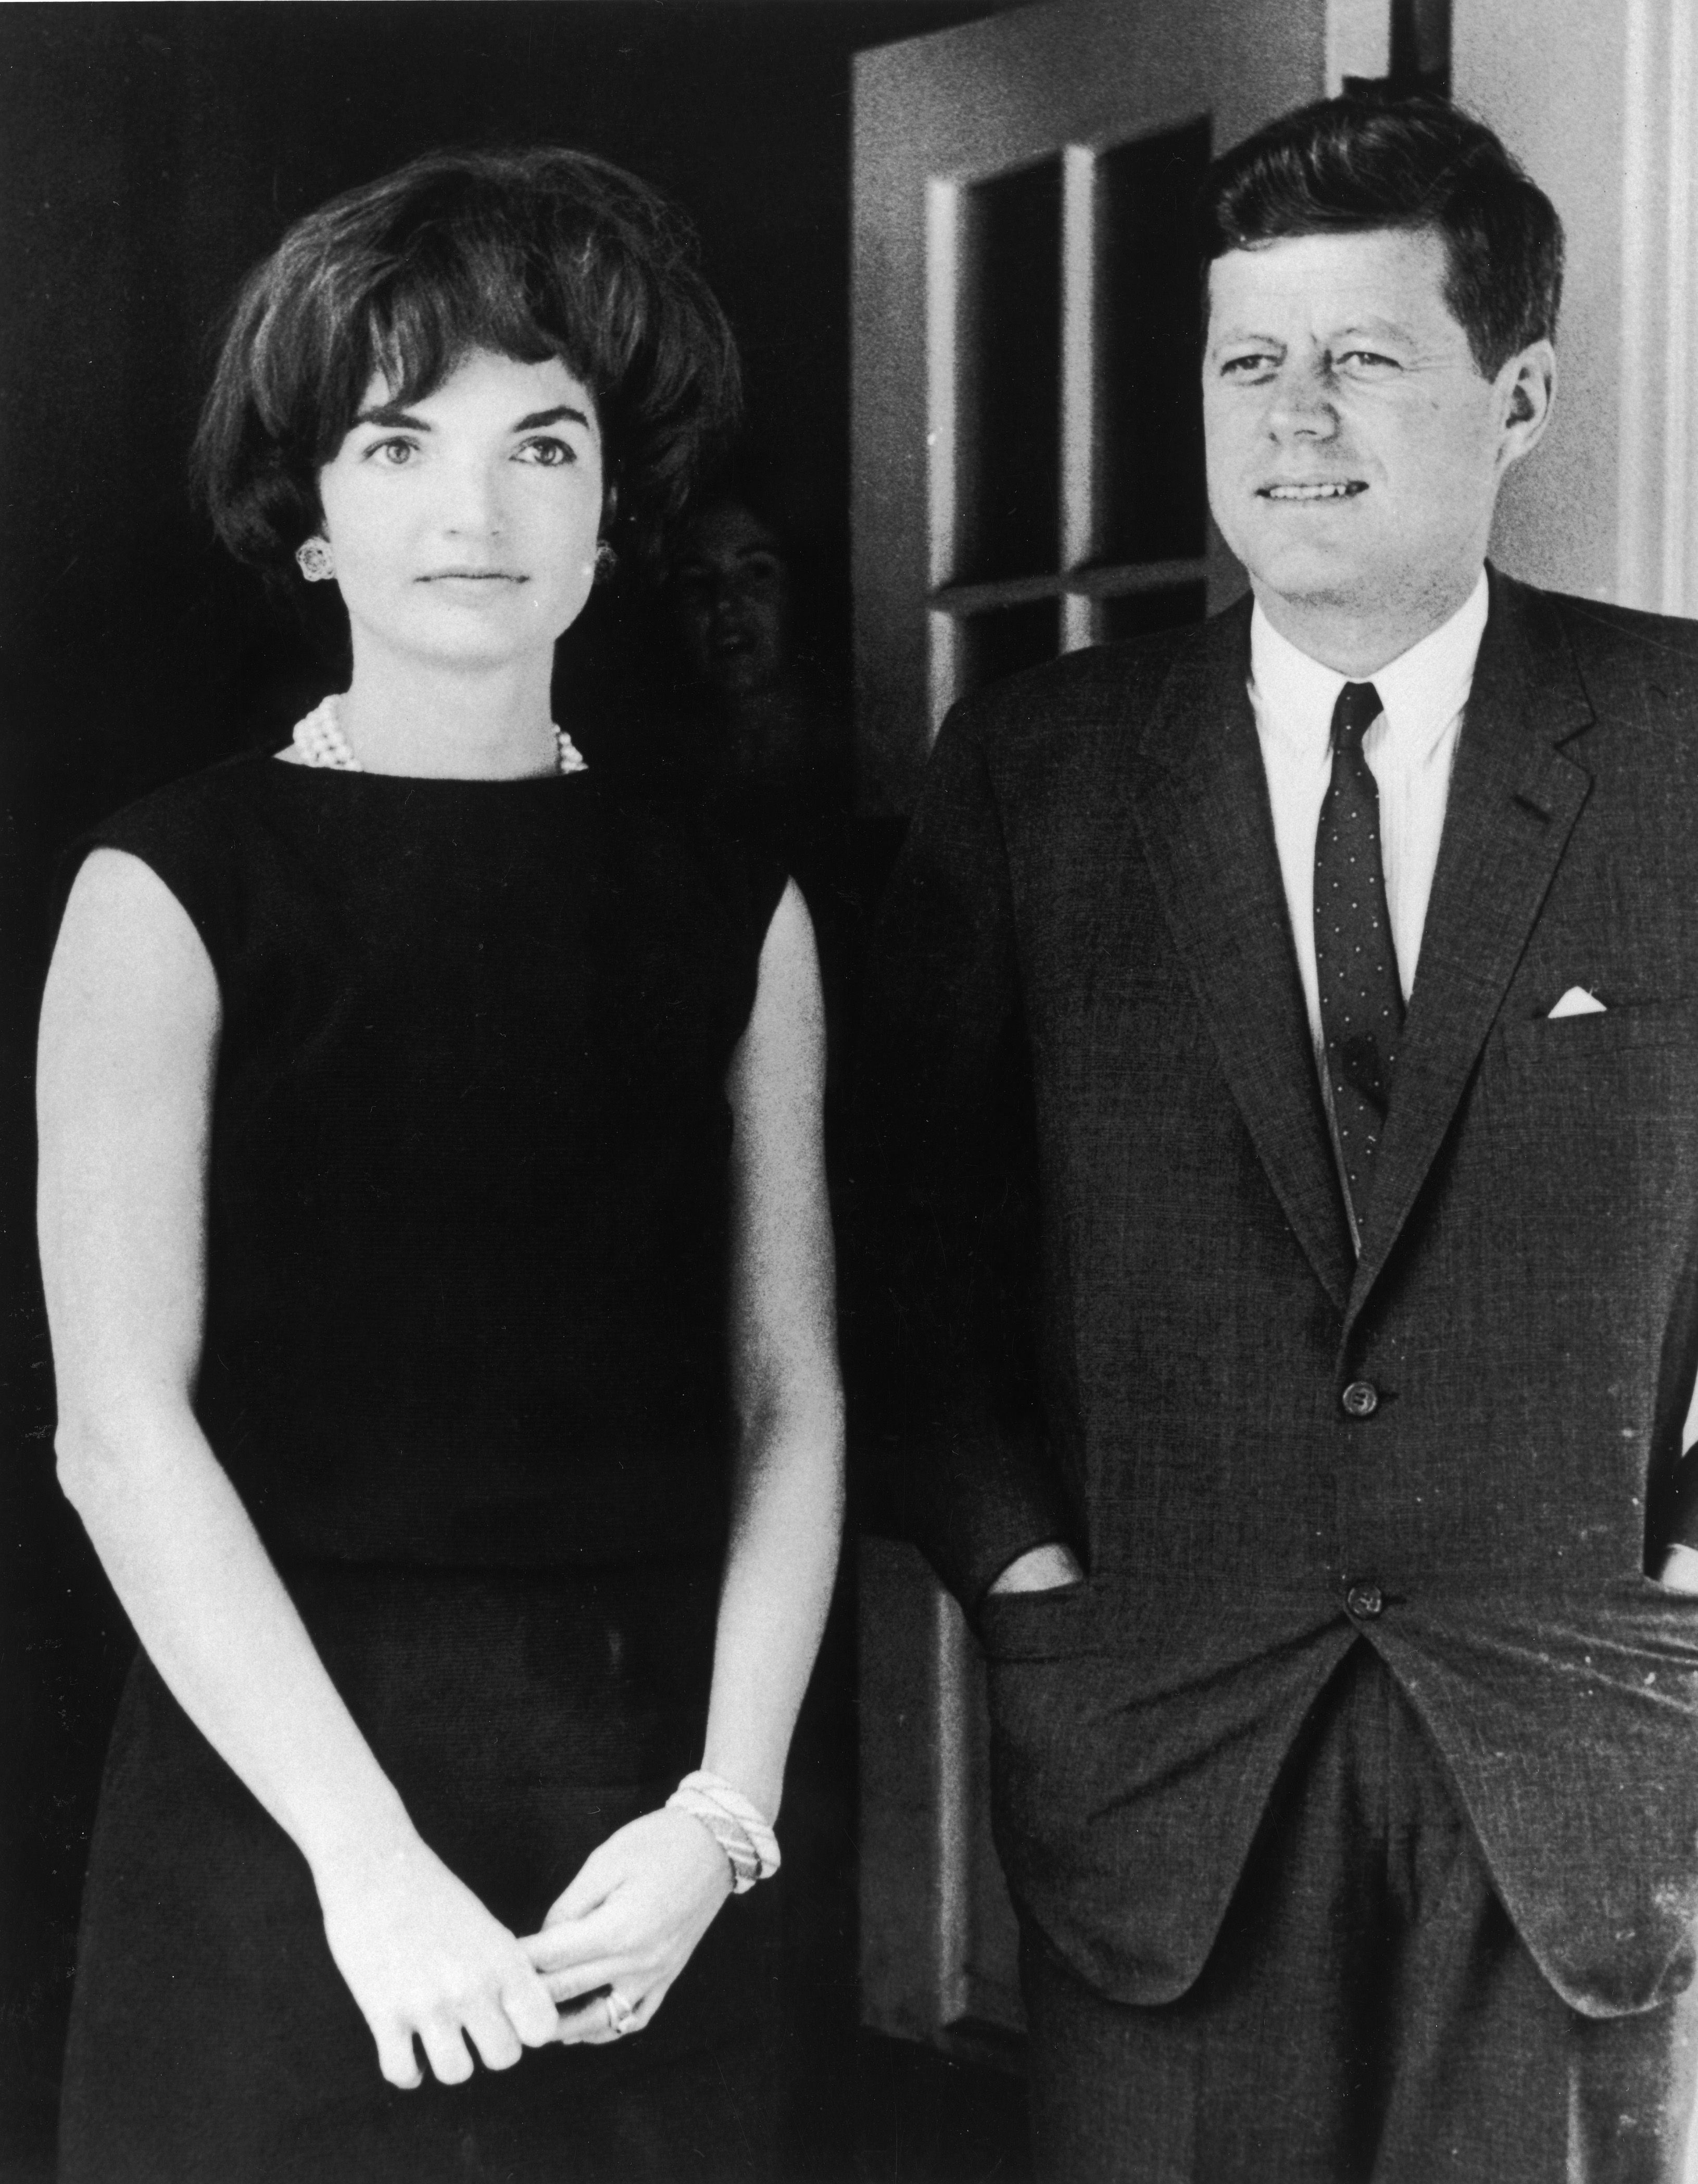 American First Lady Jacqueline Kennedy with her husband President John F. Kennedy at the White House in Washington, D.C., circa 1961. | Source: Hulton Archive/Getty Images